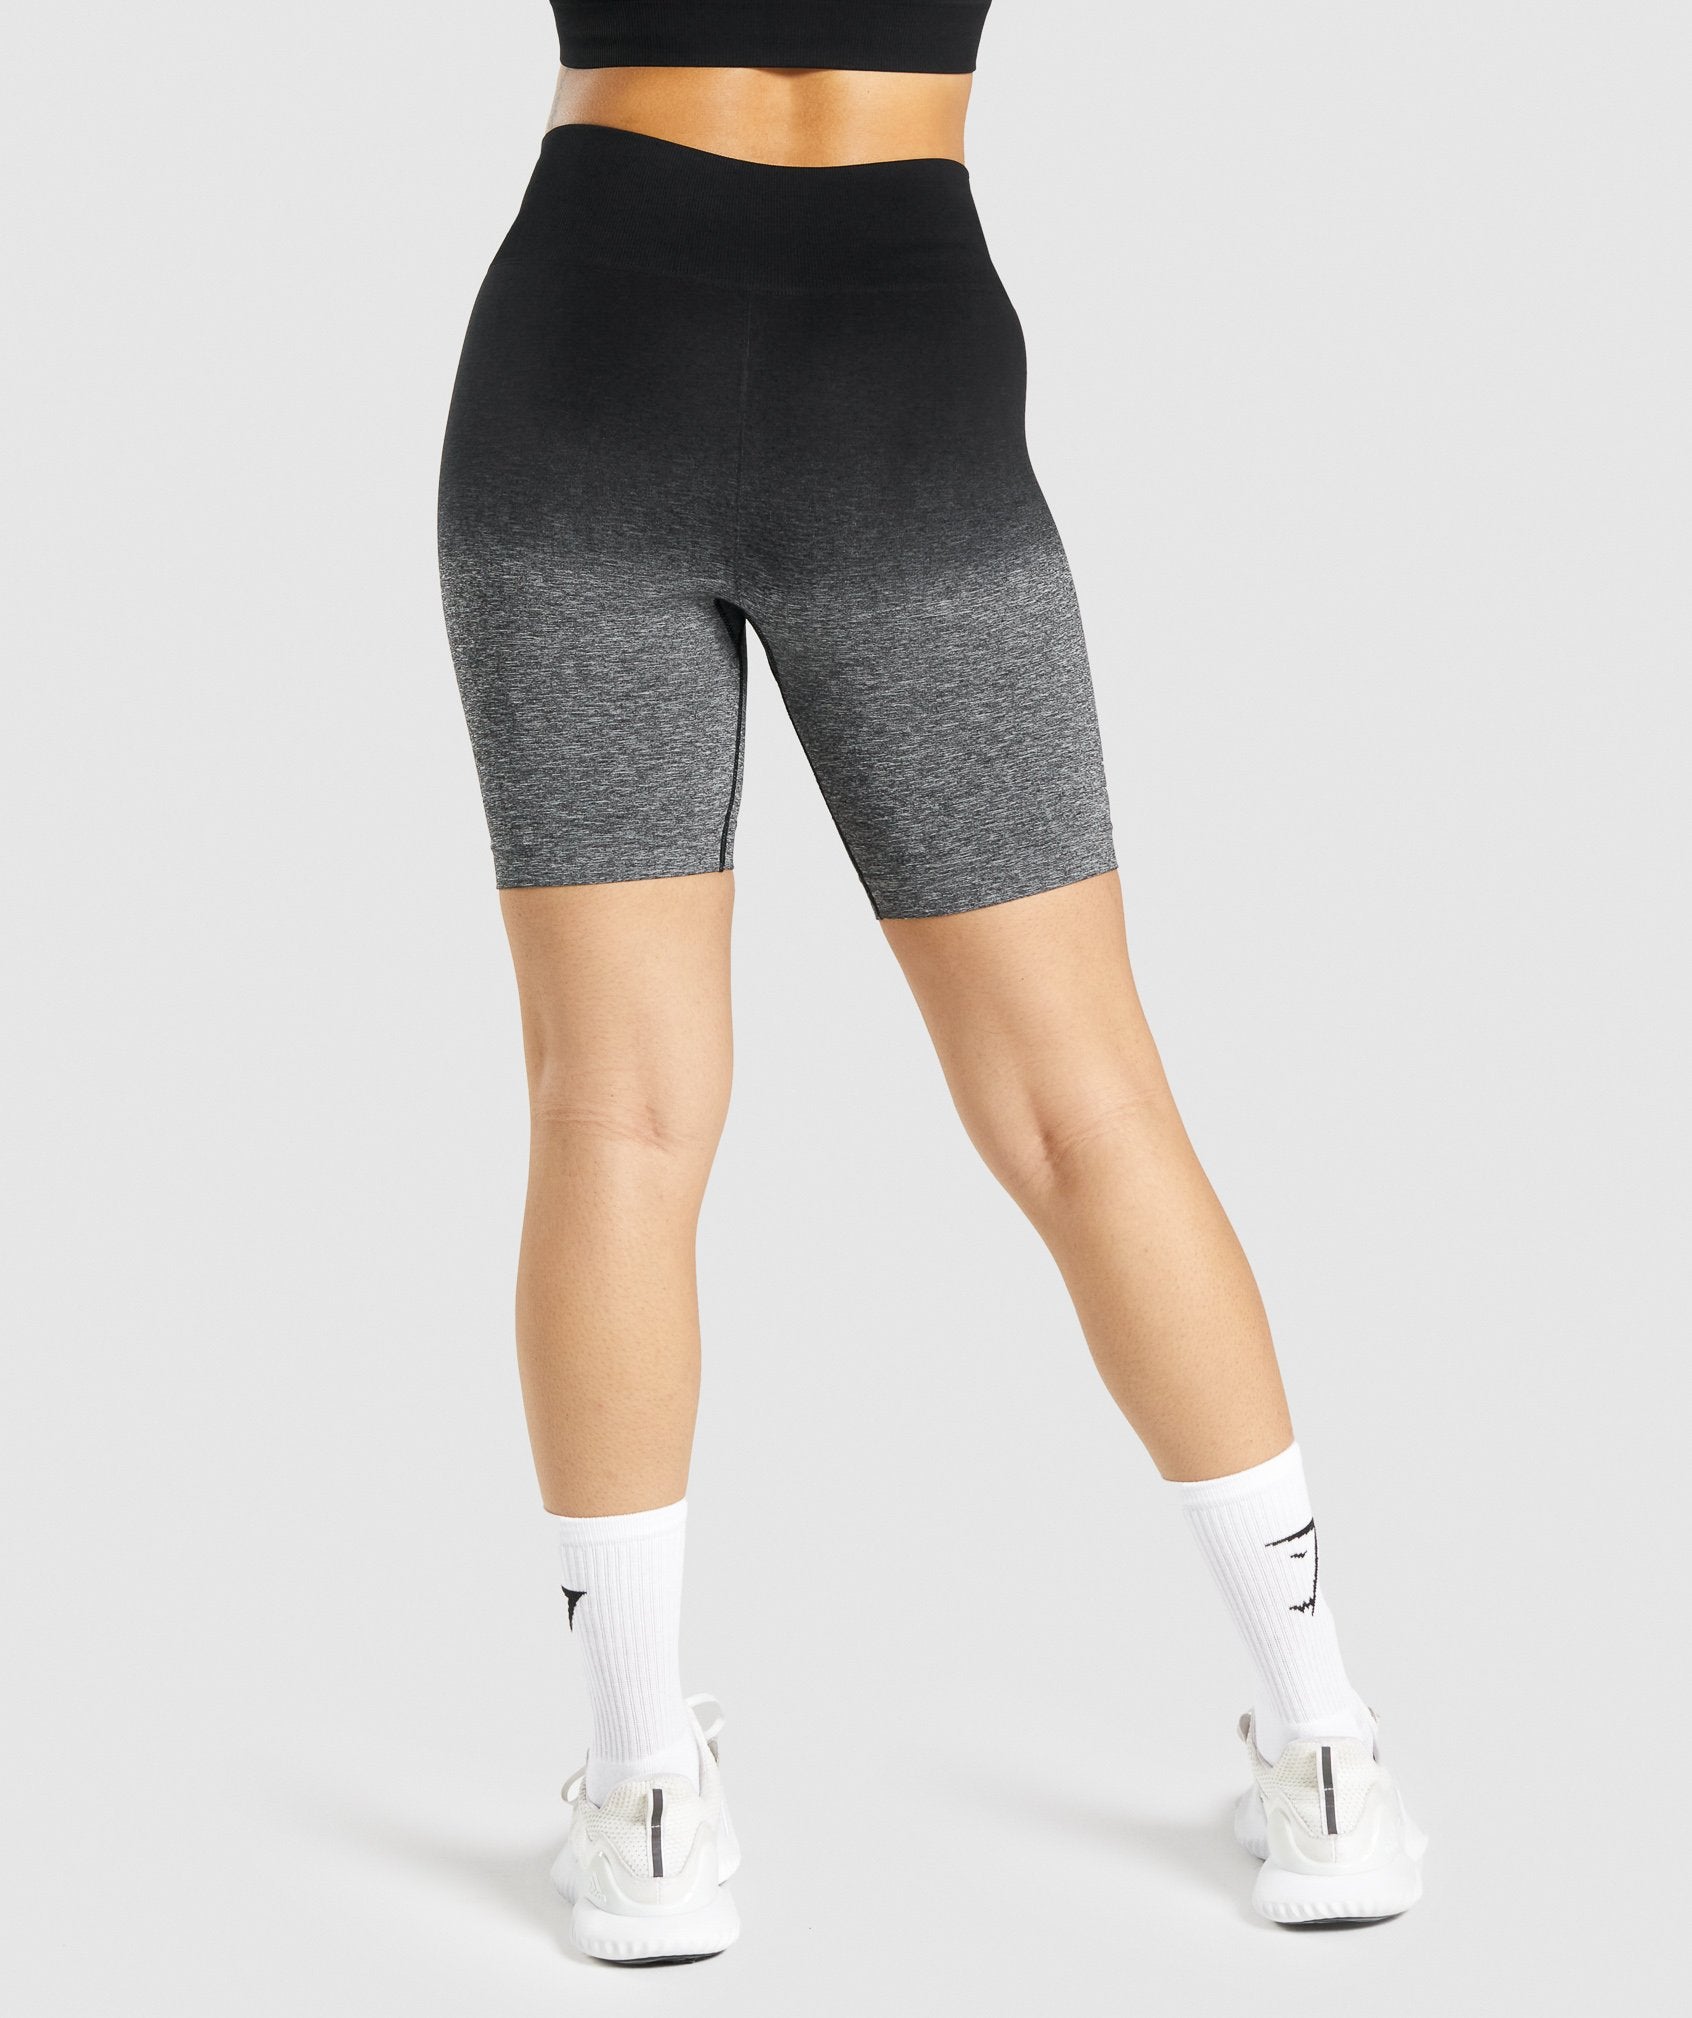 Adapt Ombre Seamless Shorts in Black/Black Marl